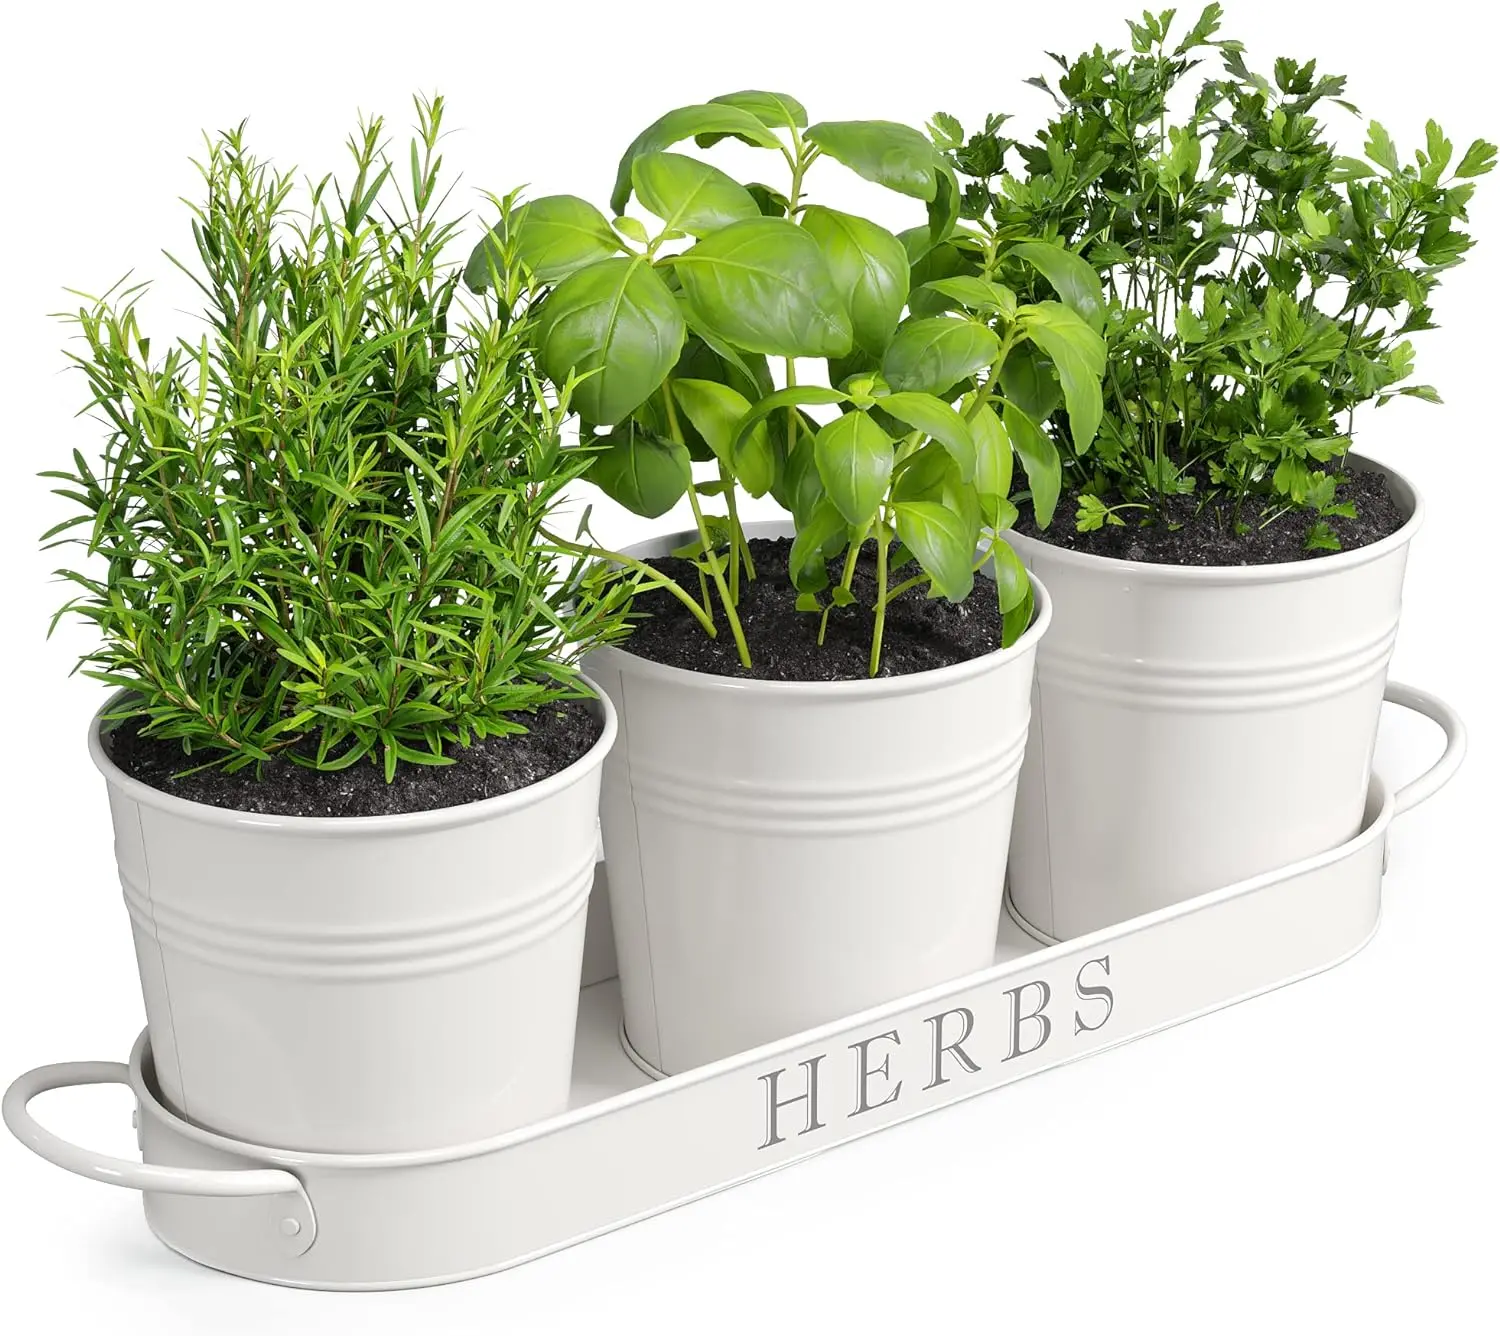 Paper Tube Seed Planting + How To Create An Upcycled Herb Garden